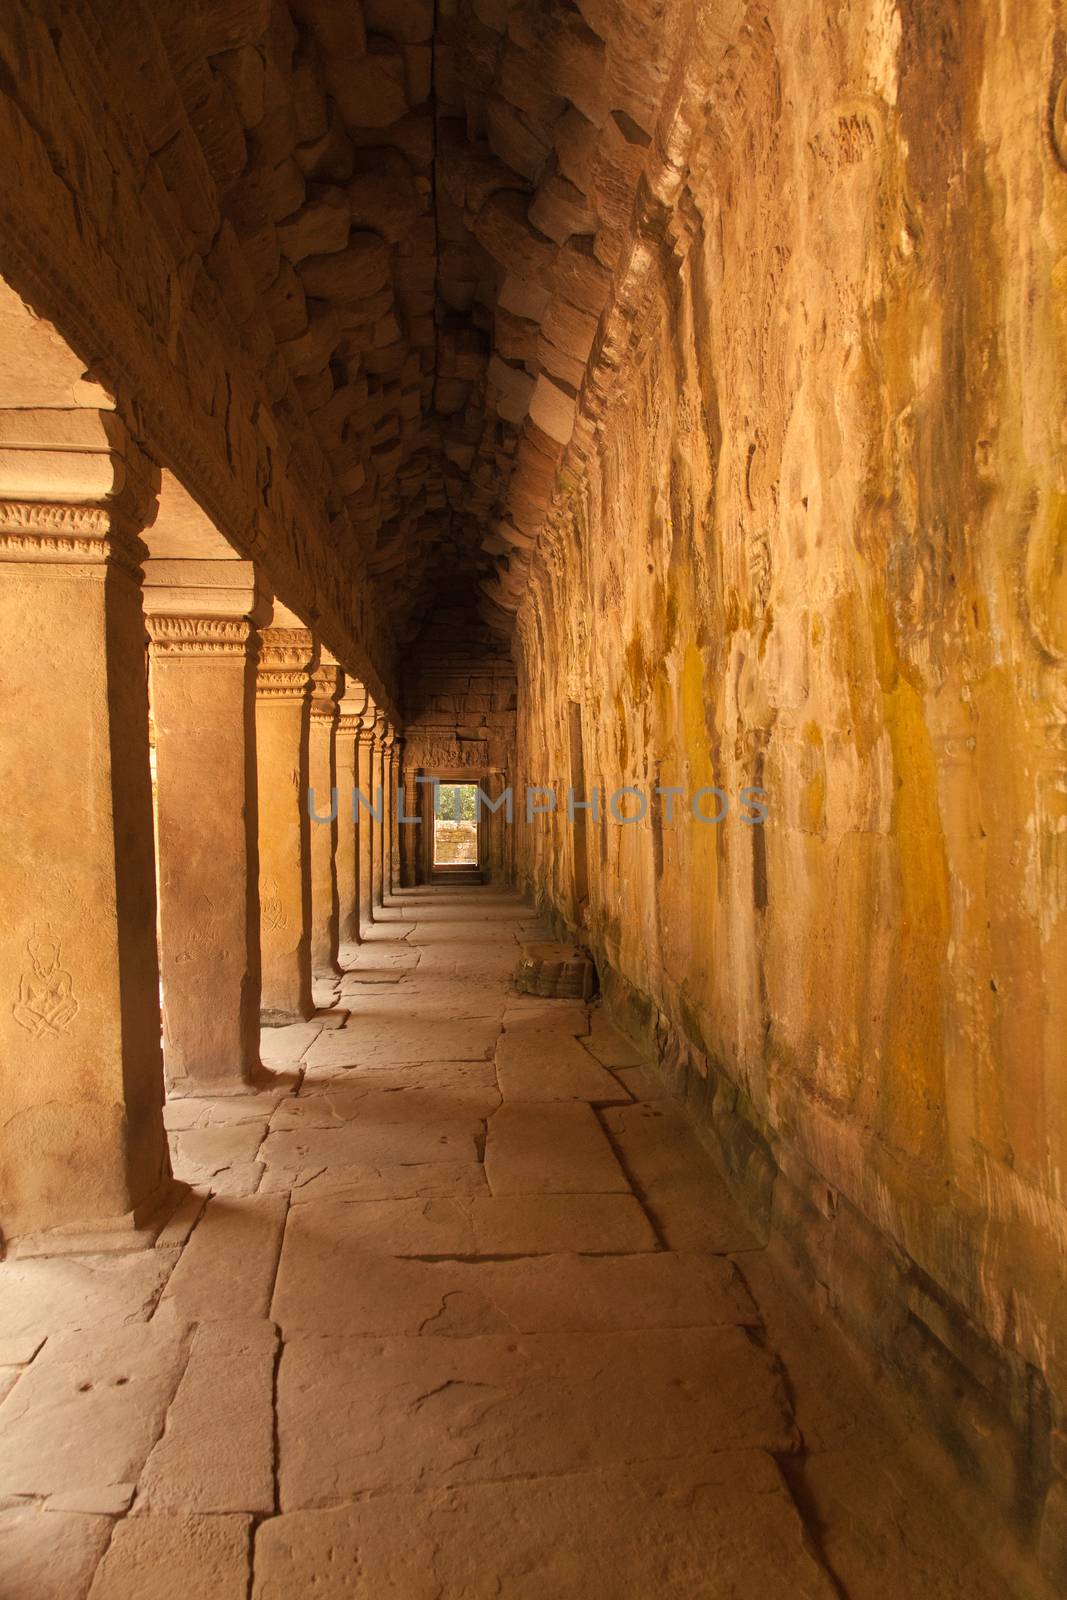 The temples of Angkor Watt, Cambodia, golden passageway with repeating arches by kgboxford